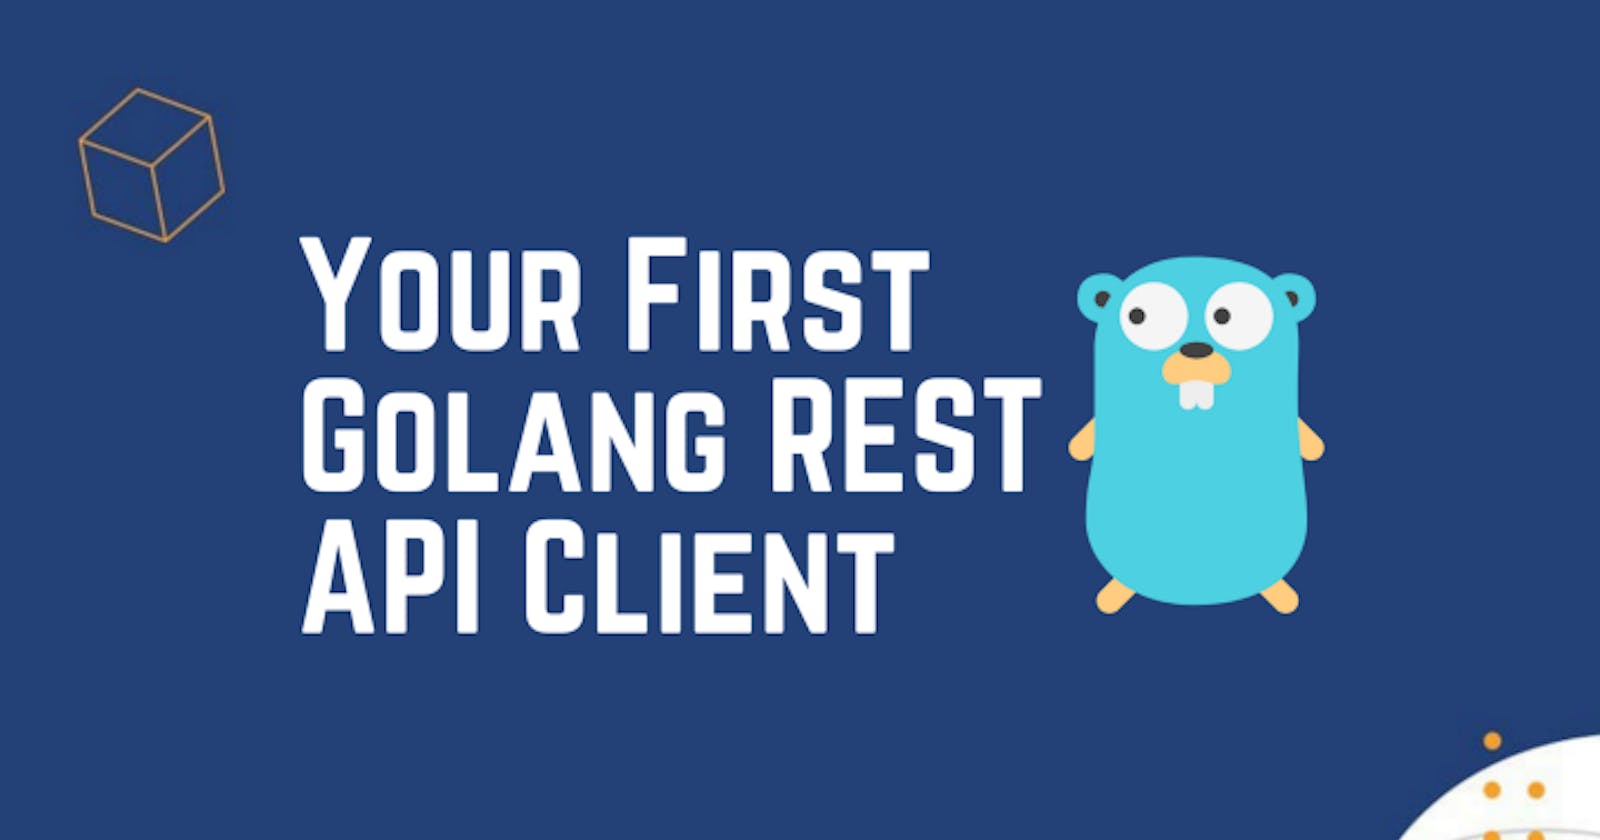 Your First Golang REST API Client